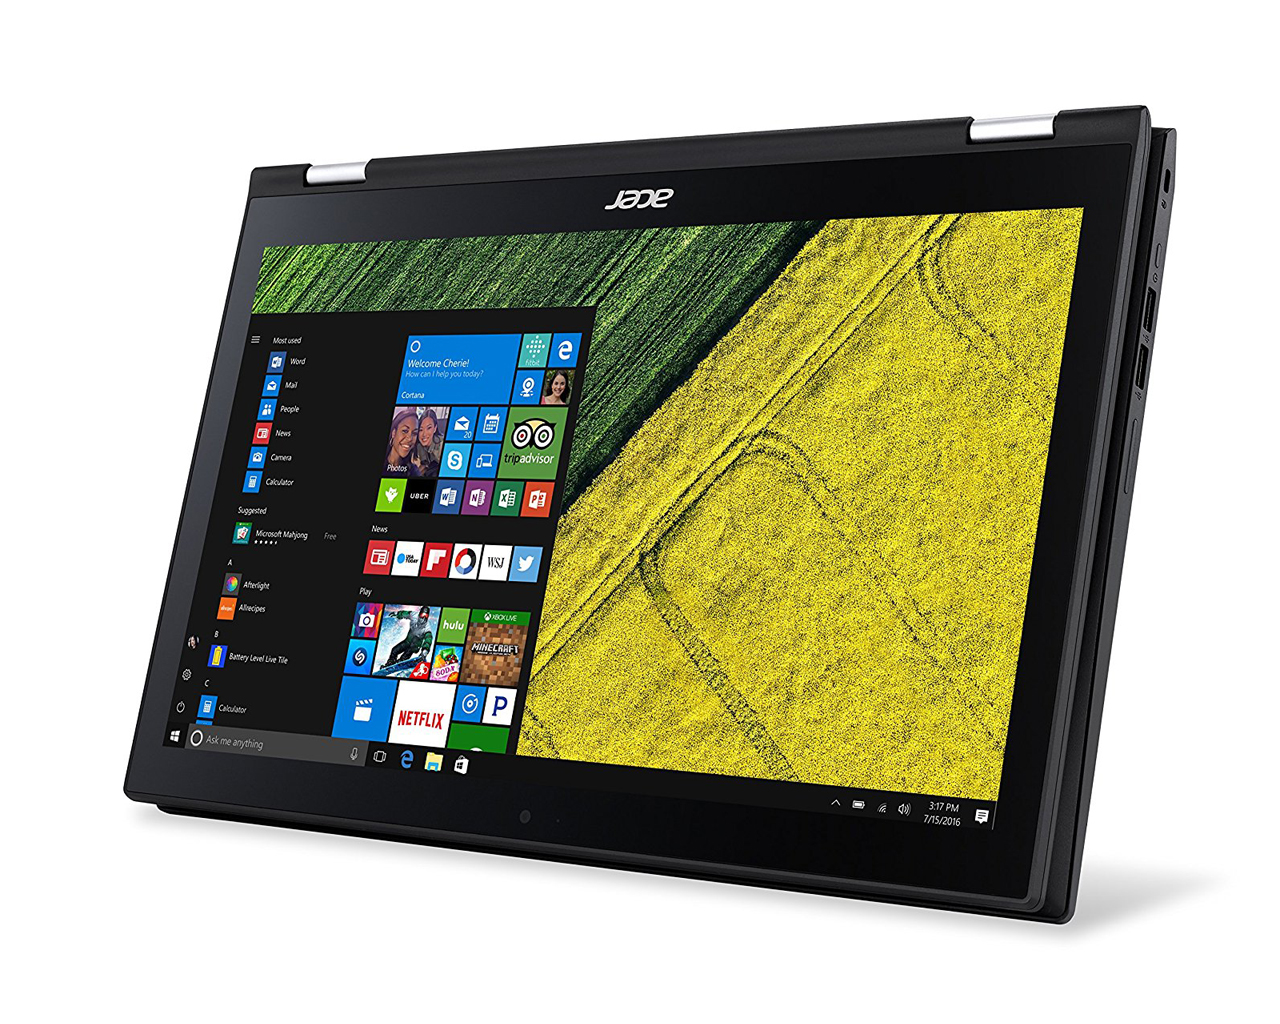 Acer Spin 3 SP315-51-34CS